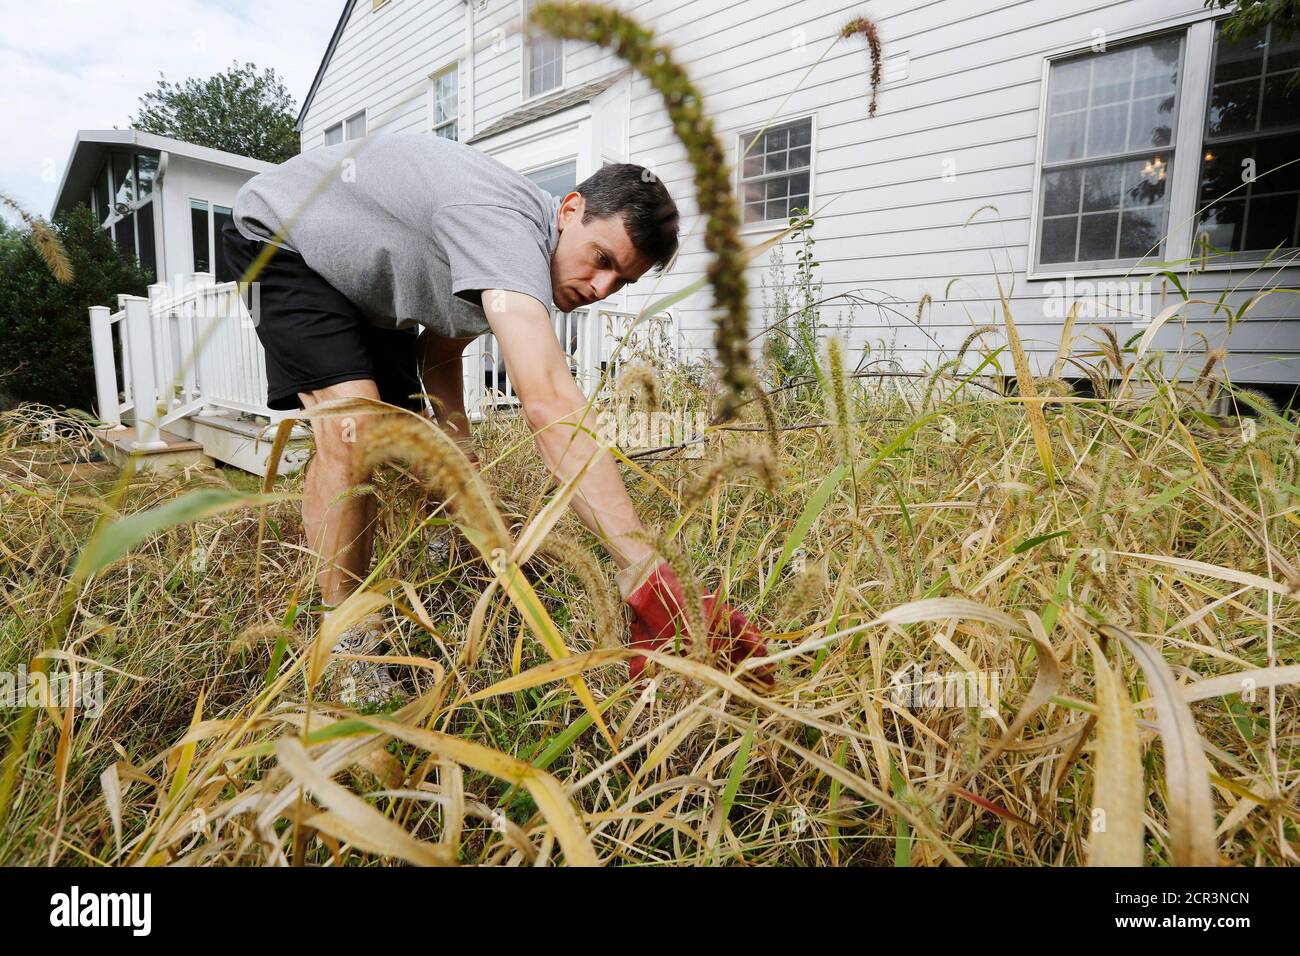 U.S. government statistician Steve Hanway, who normally leads a team of statisticians tallying injuries of consumers for the U.S. Consumer Product Safety Commission, spends some of the time he cannot be working because of the U.S. government shutdown weeding a long neglected garden outside his home in Gaithersburg, Maryland October 4, 2013. Hanway is spending his days sidelined in his home in Gaithersburg, Maryland, one of about 800,000 federal workers furloughed in the first U.S. government shutdown in 17 years.  REUTERS/Jim Bourg   (UNITED STATES - Tags: BUSINESS POLITICS) Stock Photo